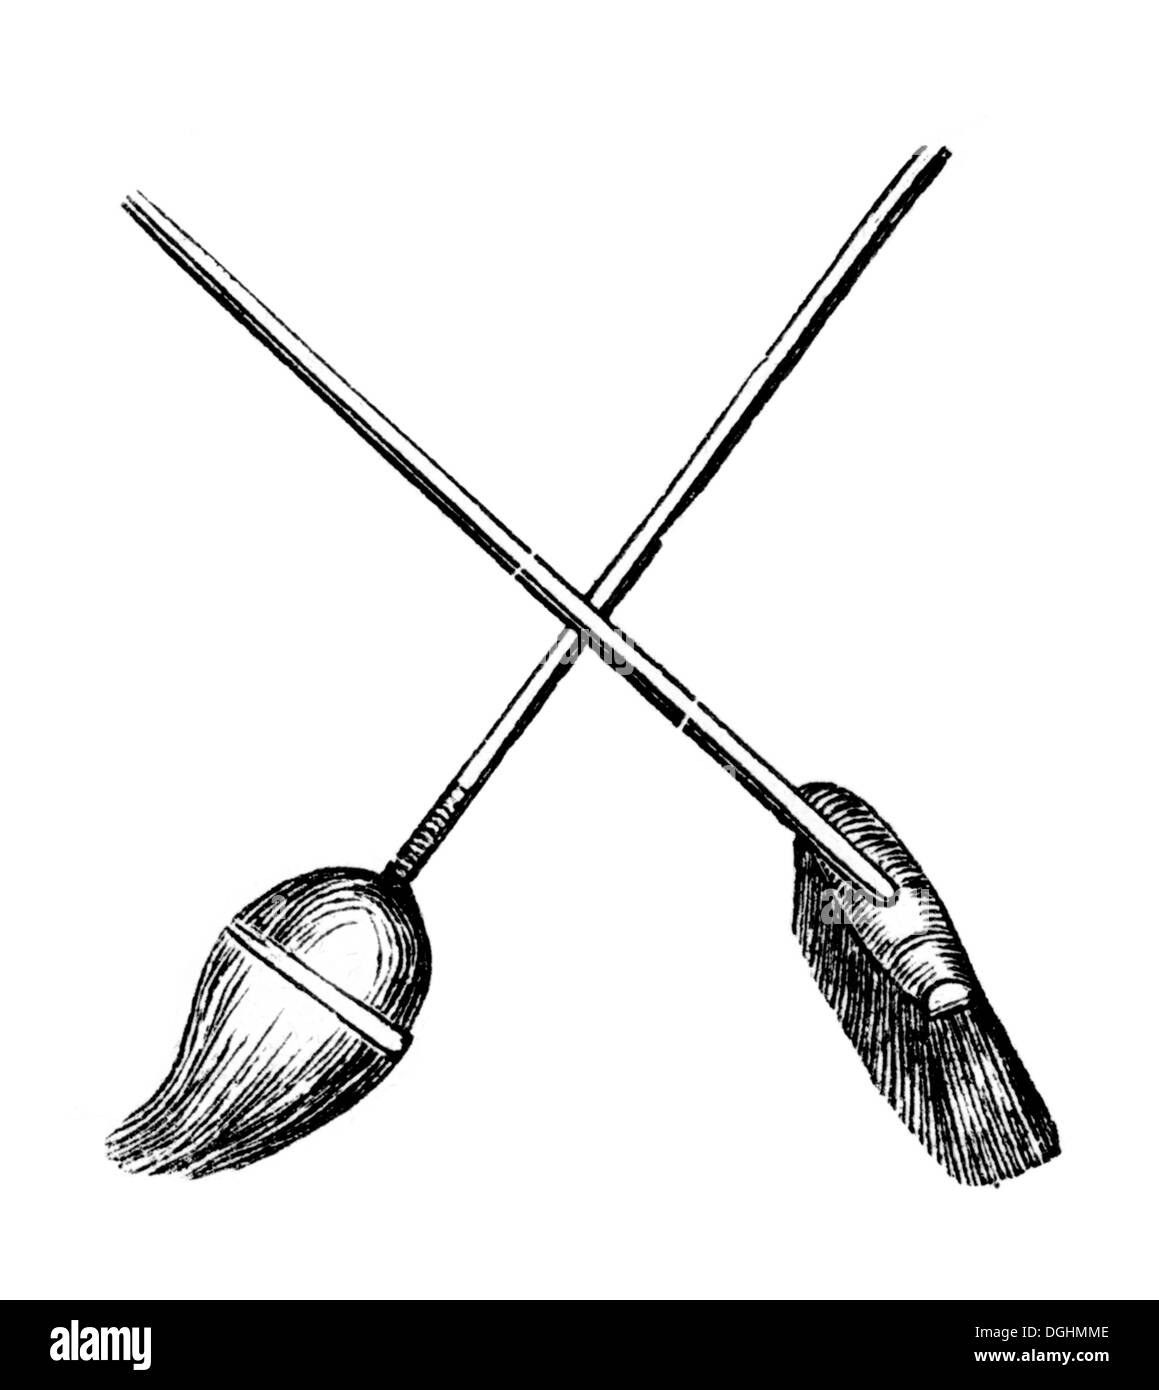 Besom broom, historical illustration from: Marie Adenfeller, Friedrich Werner: Illustrated cooking and housekeeping book Stock Photo